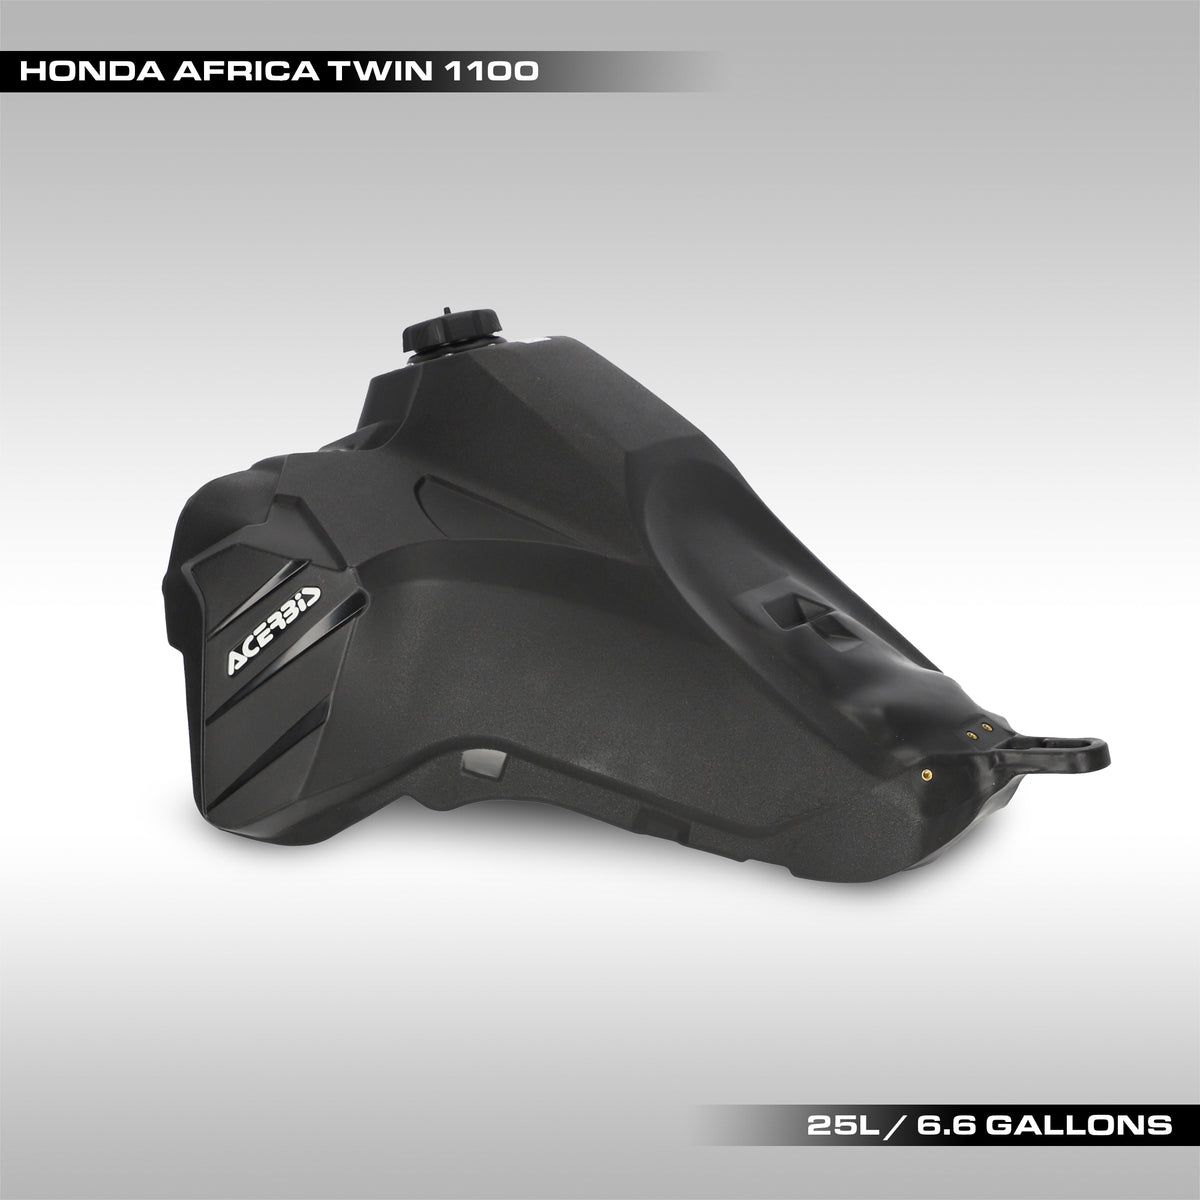 Larger Honda Africa Twin 1100L fuel tank. Aftermarket fuel tank from Acerbis will increase the fuel capacity of your 2020 - 2023 Honda Africa Twin by 1.6 gallons to 25 liters or 6.6 gallons. Top quality Acerbis fuel tank. Honda Africa Twin dualsport adventure motorcycle.